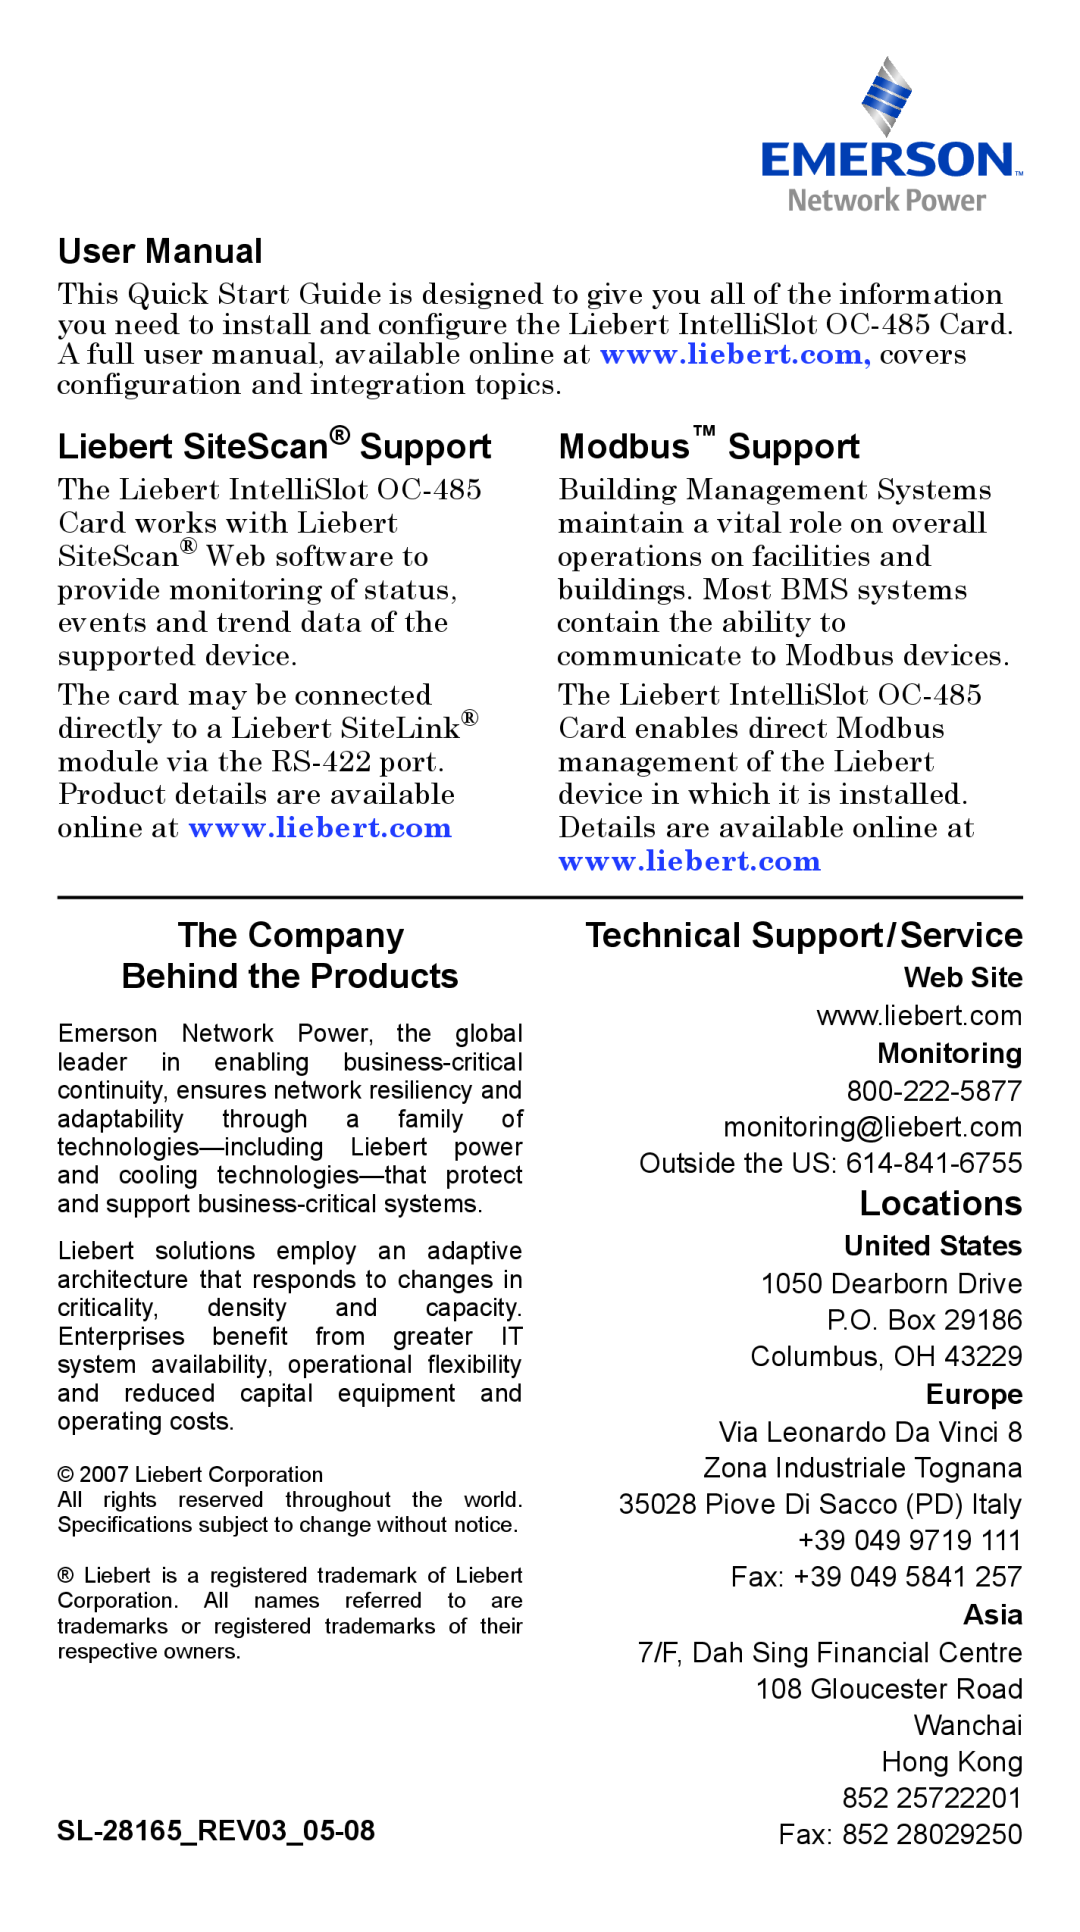 Liebert OC-485 User Manual, Liebert SiteScan Support, Modbus Support, The Company Behind the Products, Locations 